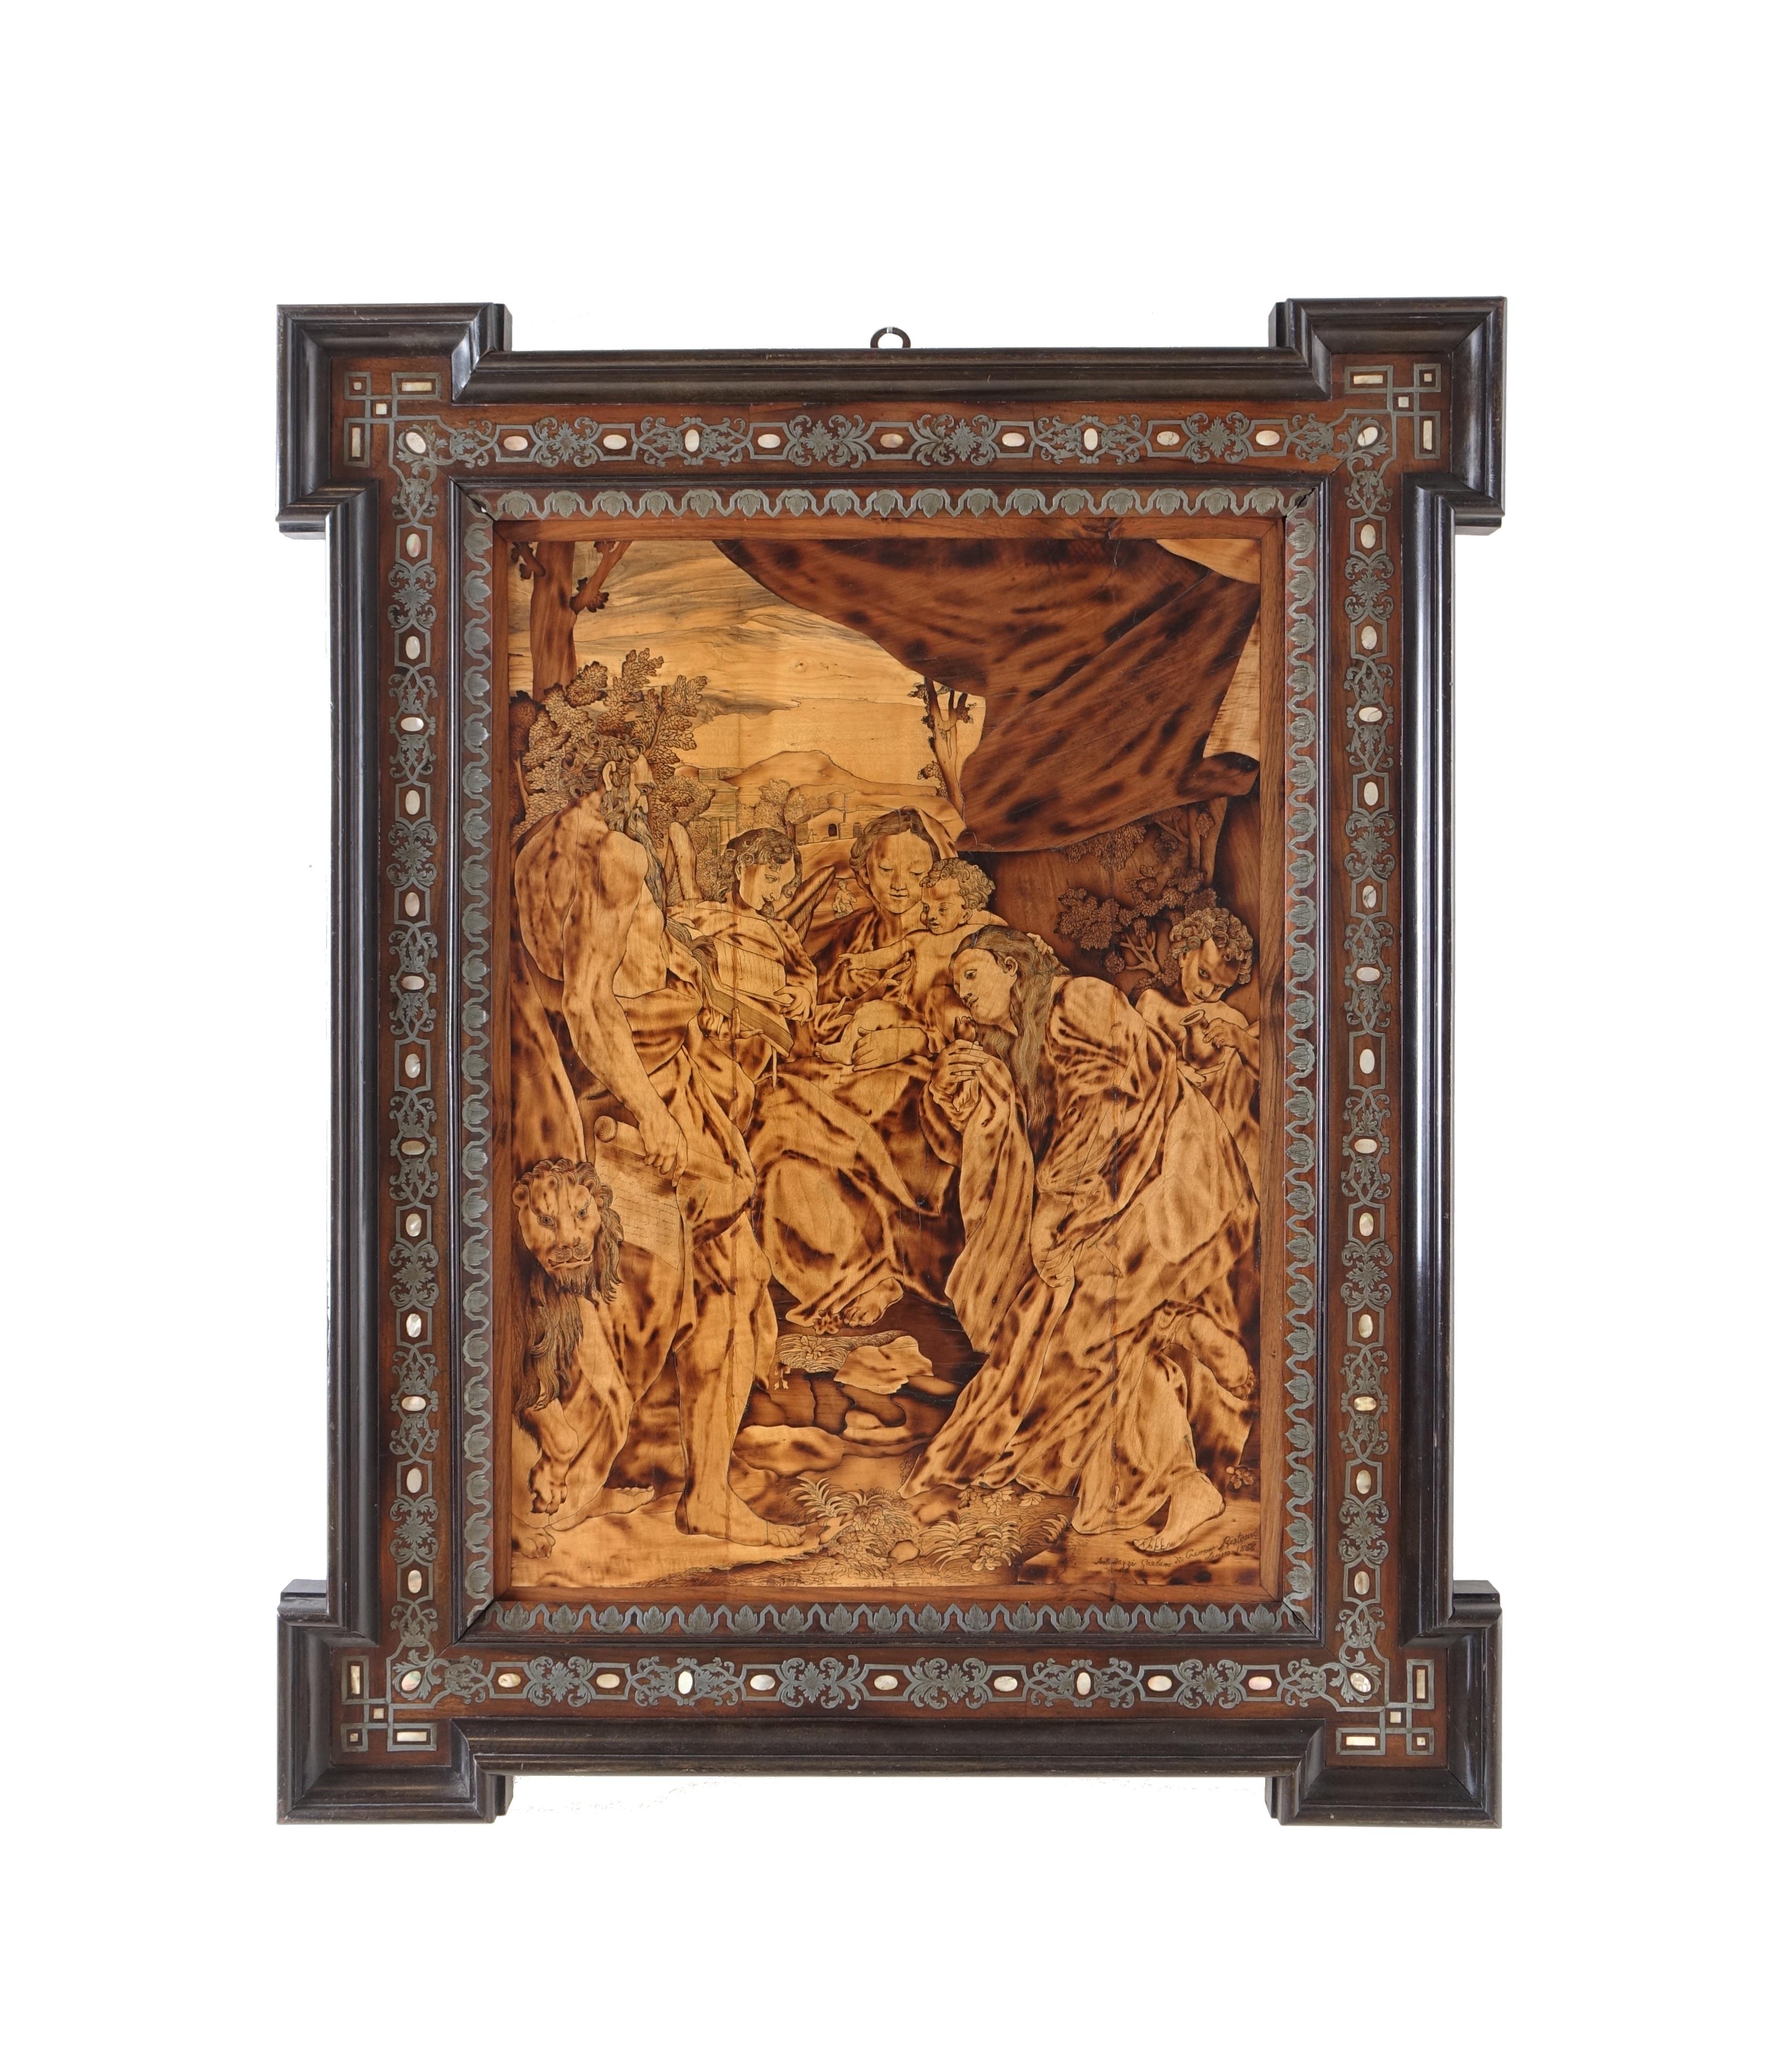 Giovanni Maffezzoli
The Madonna of San Girolamo, realized around 1795.
Poplar, maple and walnut panel.
The characters and the expressions of the same, the delicate passages of the colors are
typical of the great Master and are simply